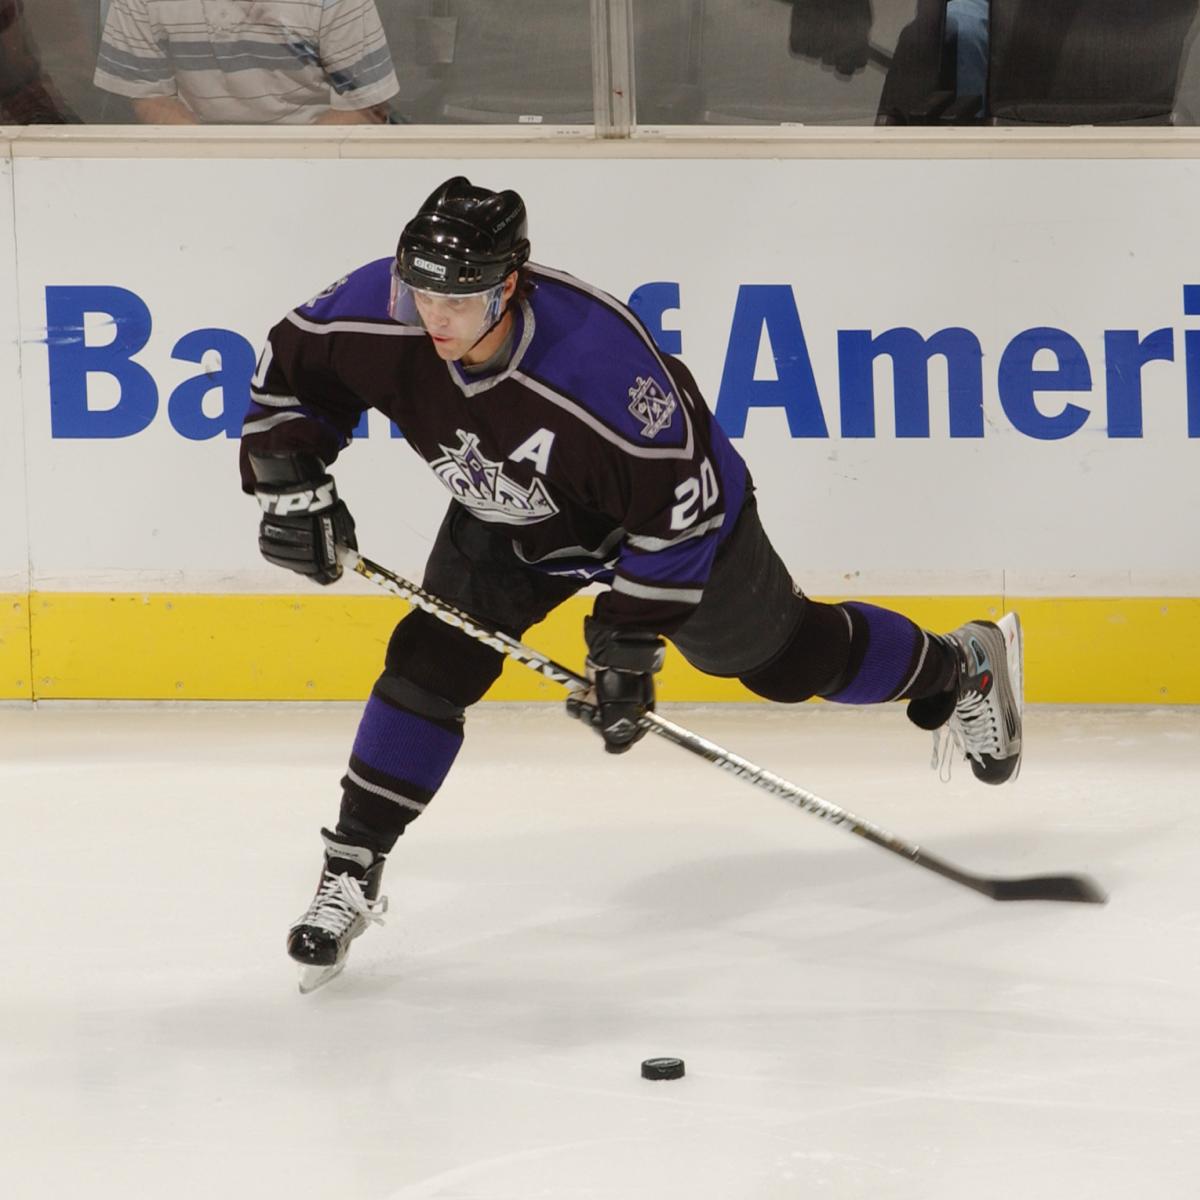 Rob Blake, Luc Robitaille introduced in new roles for Los Angeles